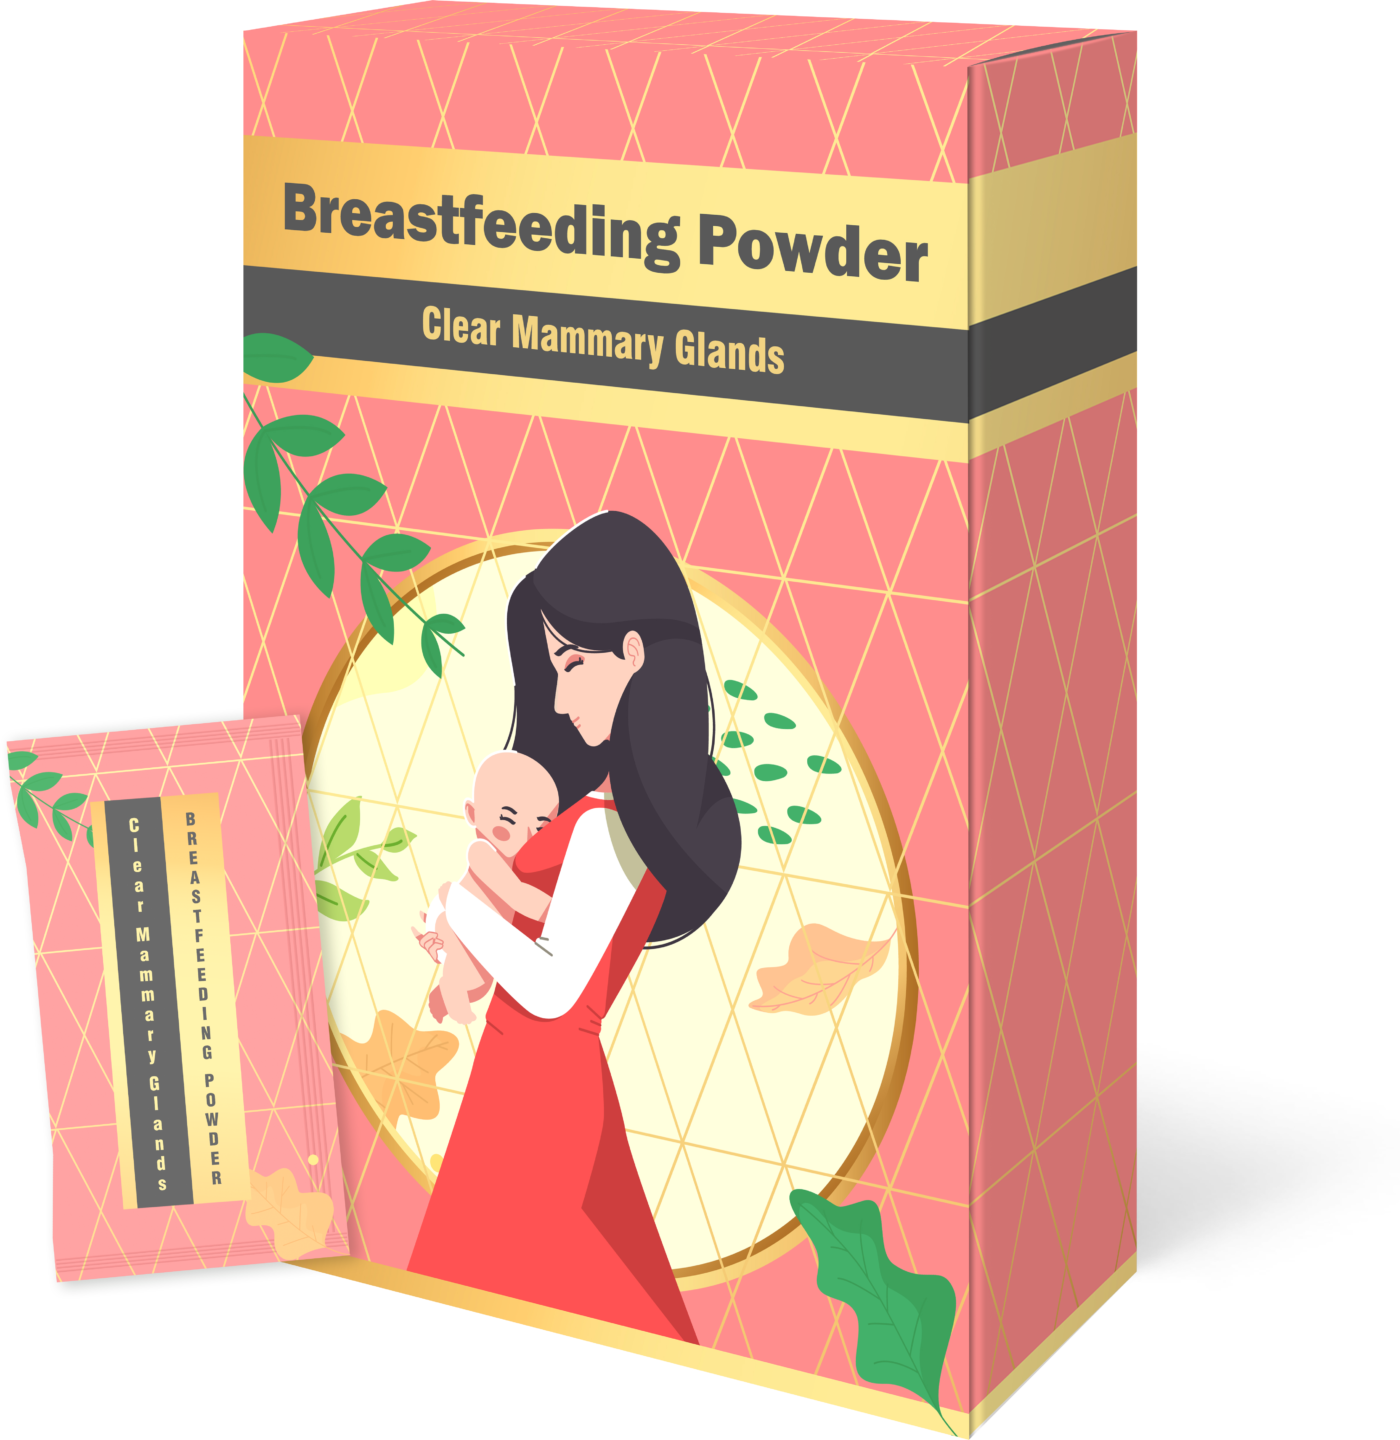 Private label Pregnancy and breastfeeding supplements